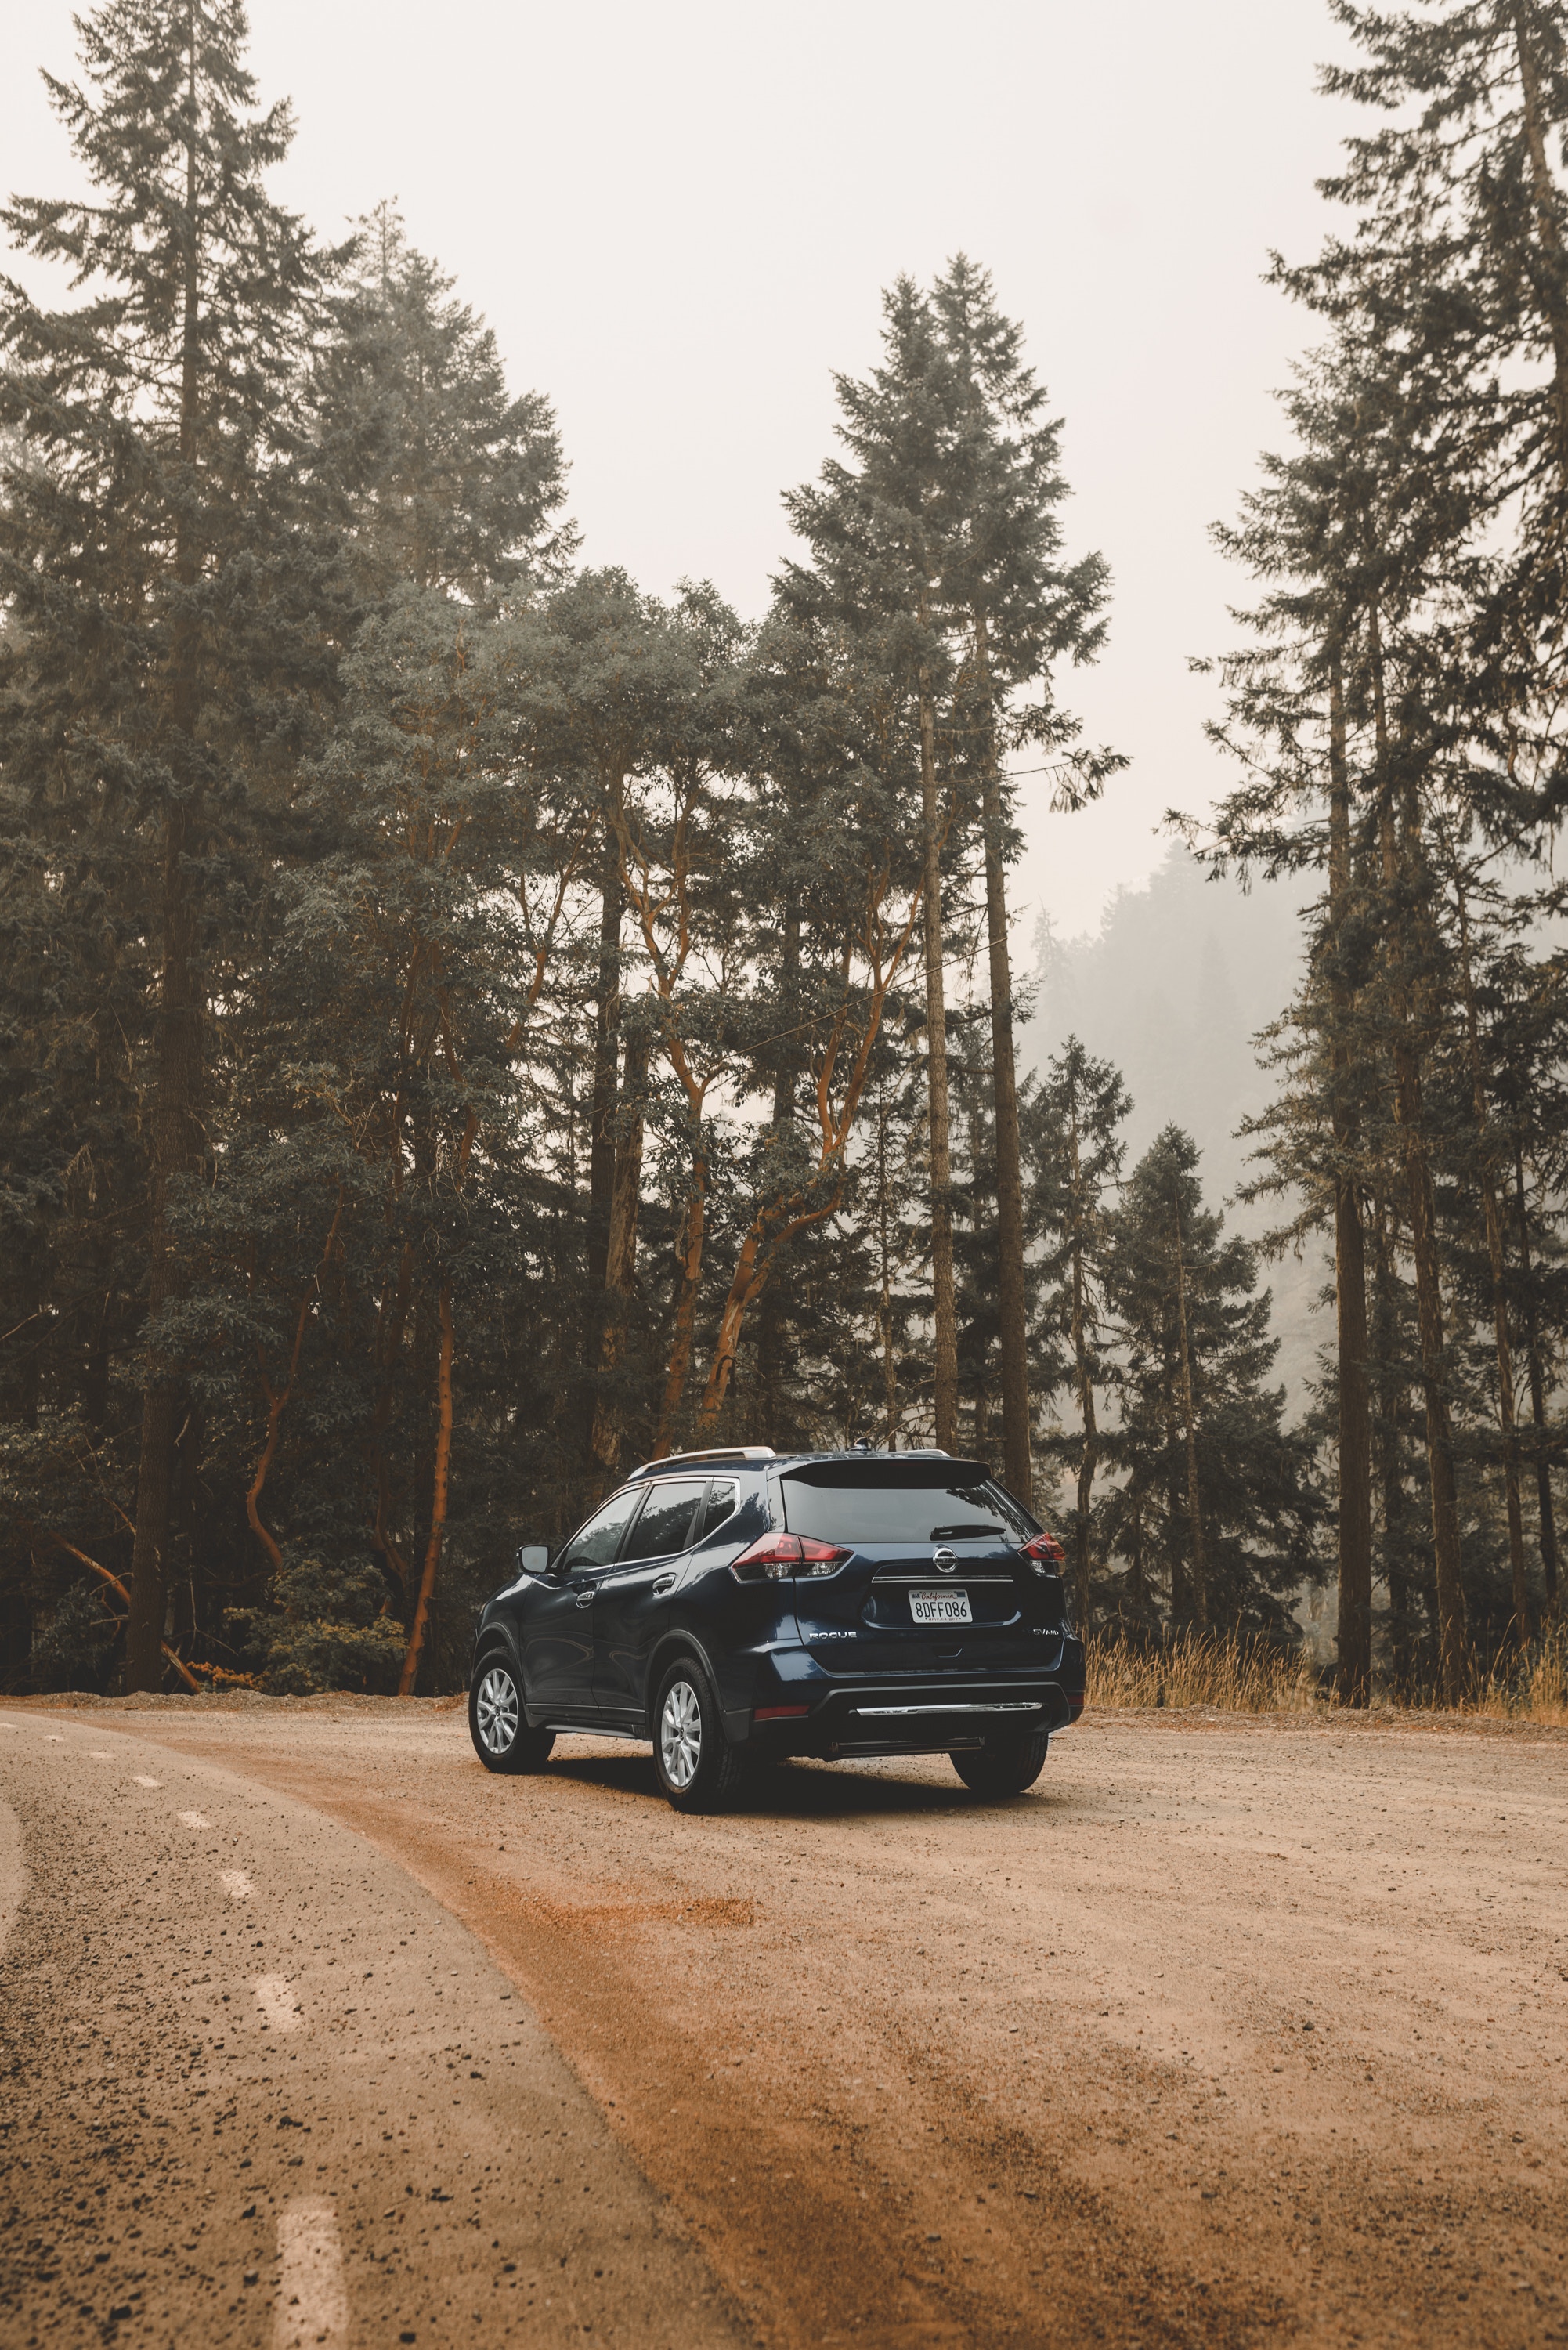 trees, nissan, cars, nissan rogue, crossover, trip